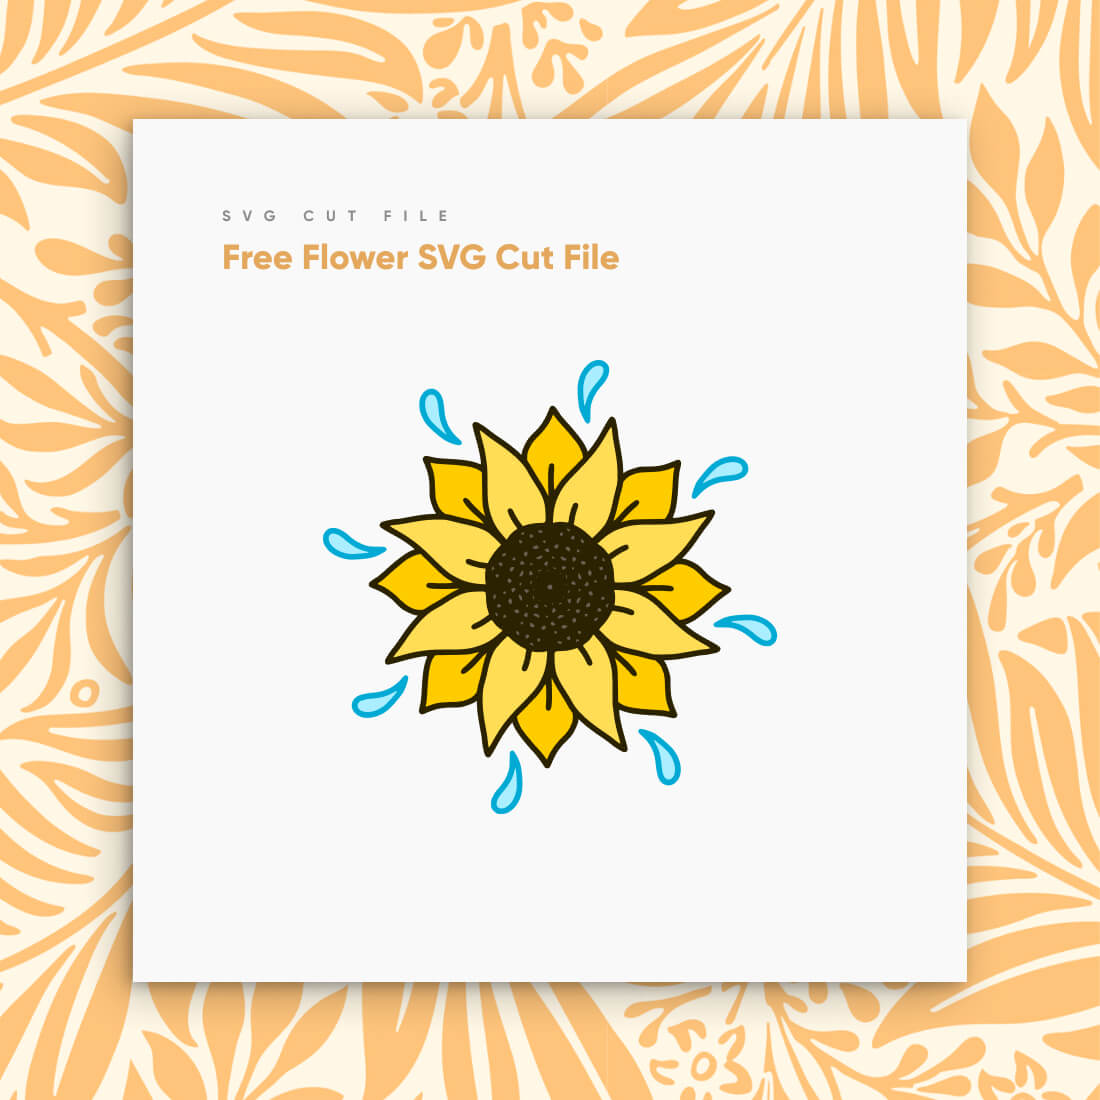 Free Flower SVG Cut File cover.